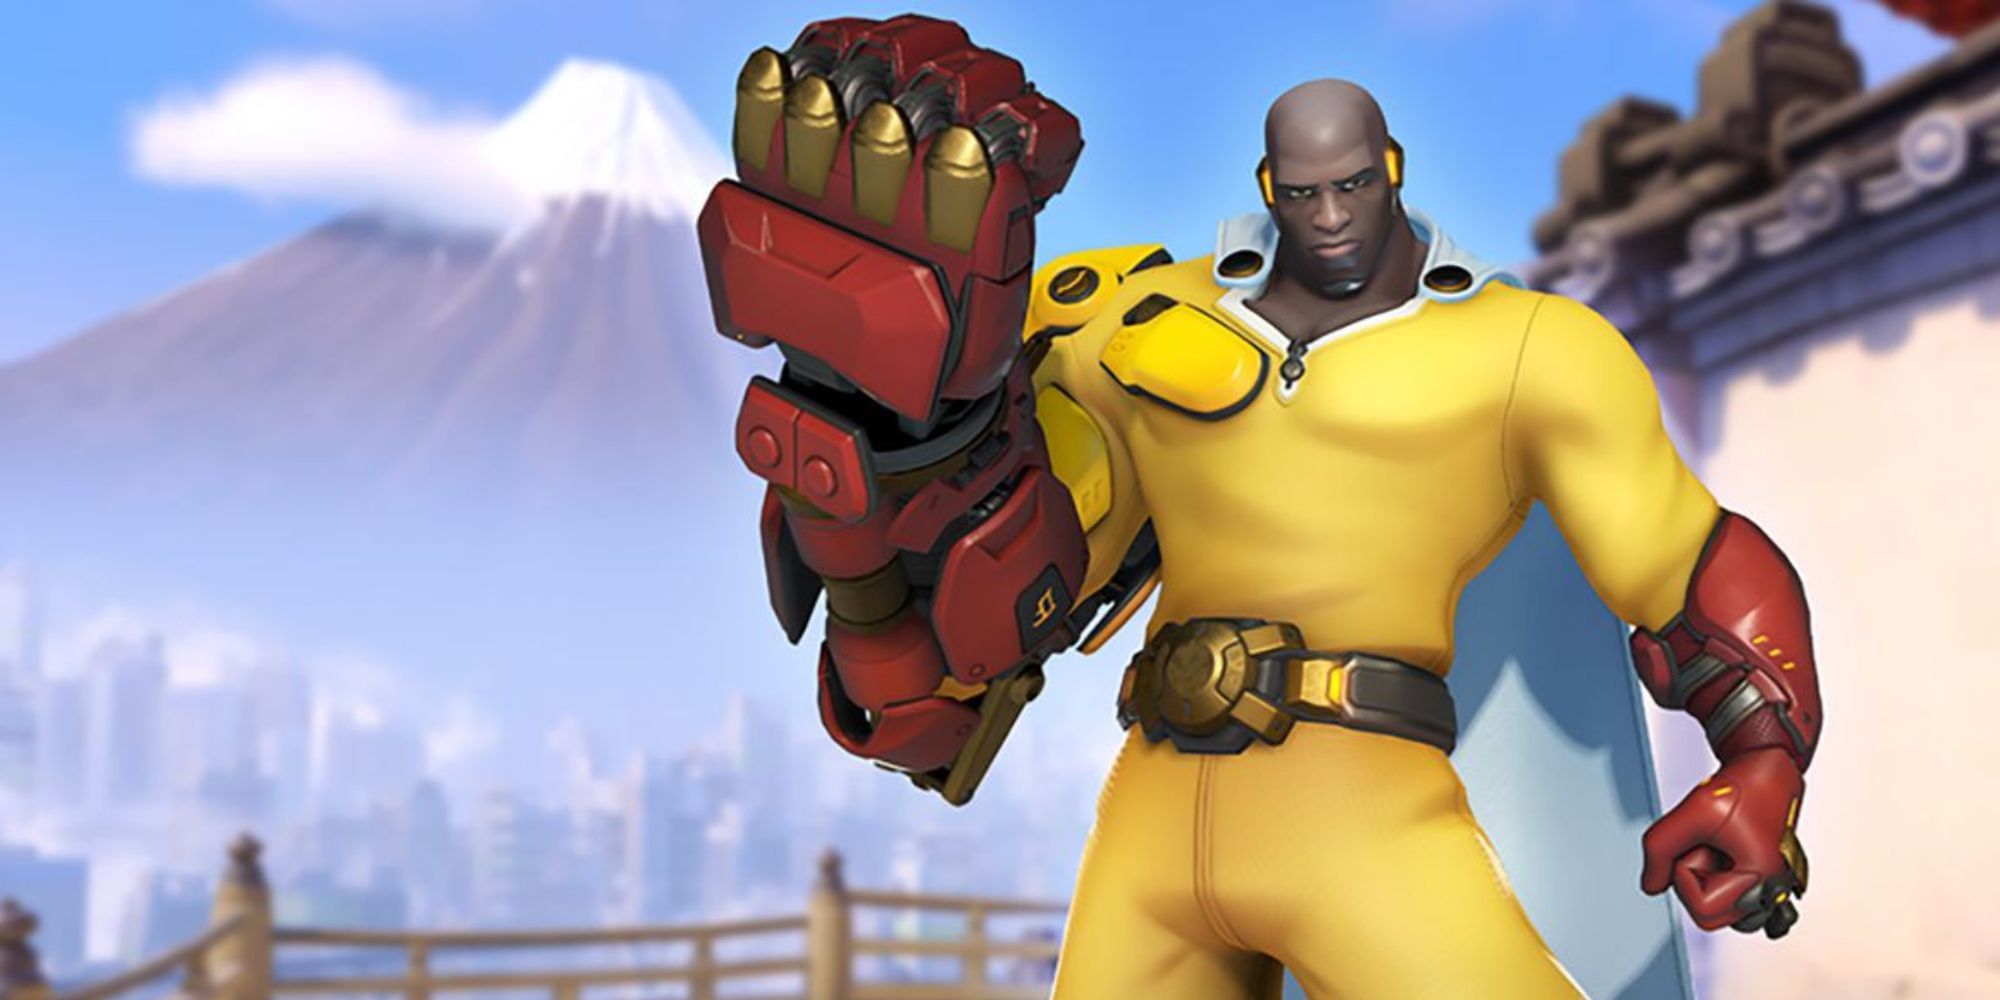 Doomfist from Overwatch in a One Punch Man cosplay